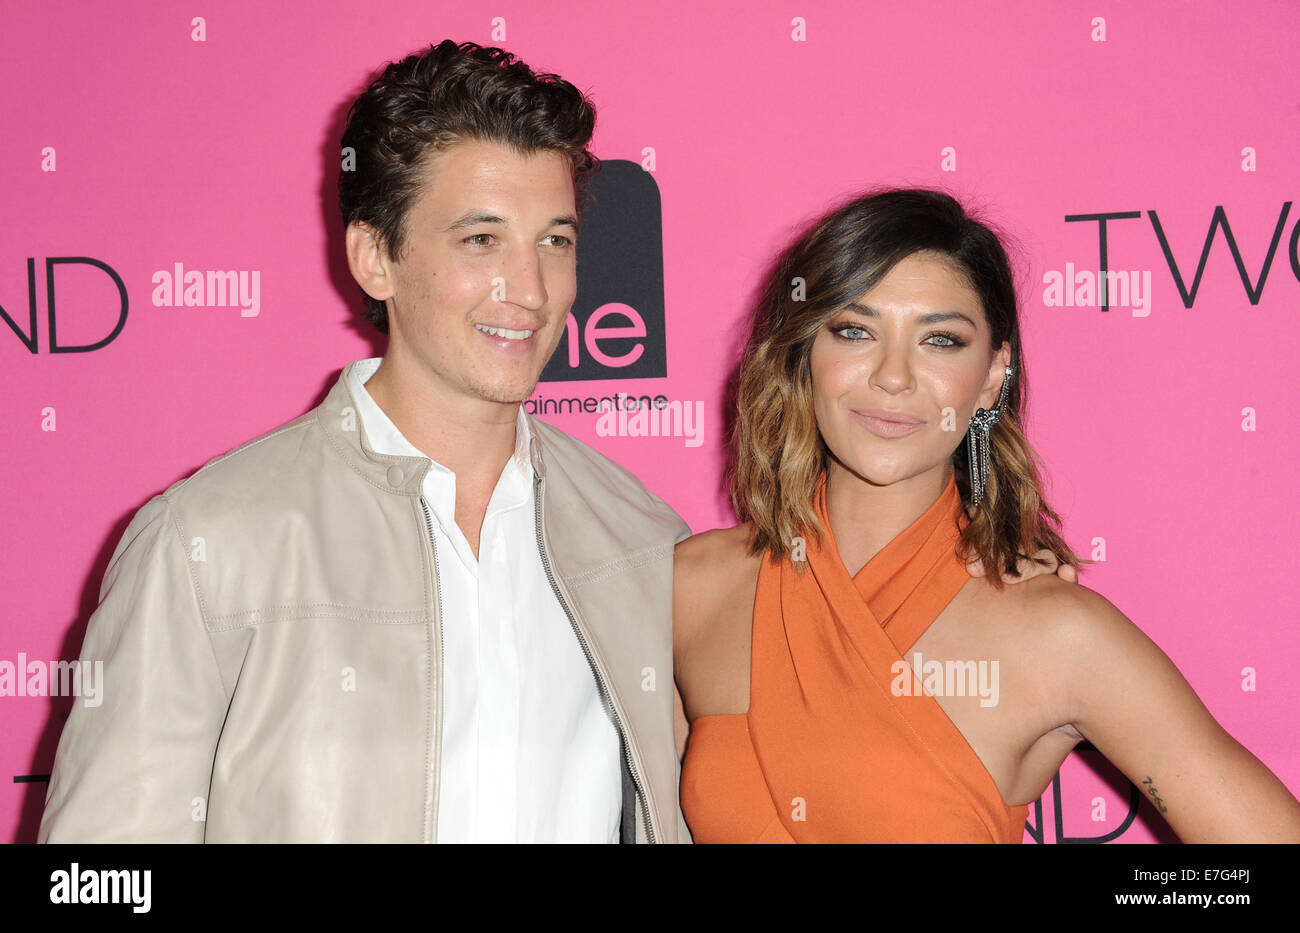 Los Angeles, California, USA. 16th Sep, 2014. MILES TELLER and JESSICA SZOHR attend the 'Two Night Stand' premiere held at the TCL Chinese 6 Theatre. Credit:  D. Long/Globe Photos/ZUMA Wire/Alamy Live News Stock Photo